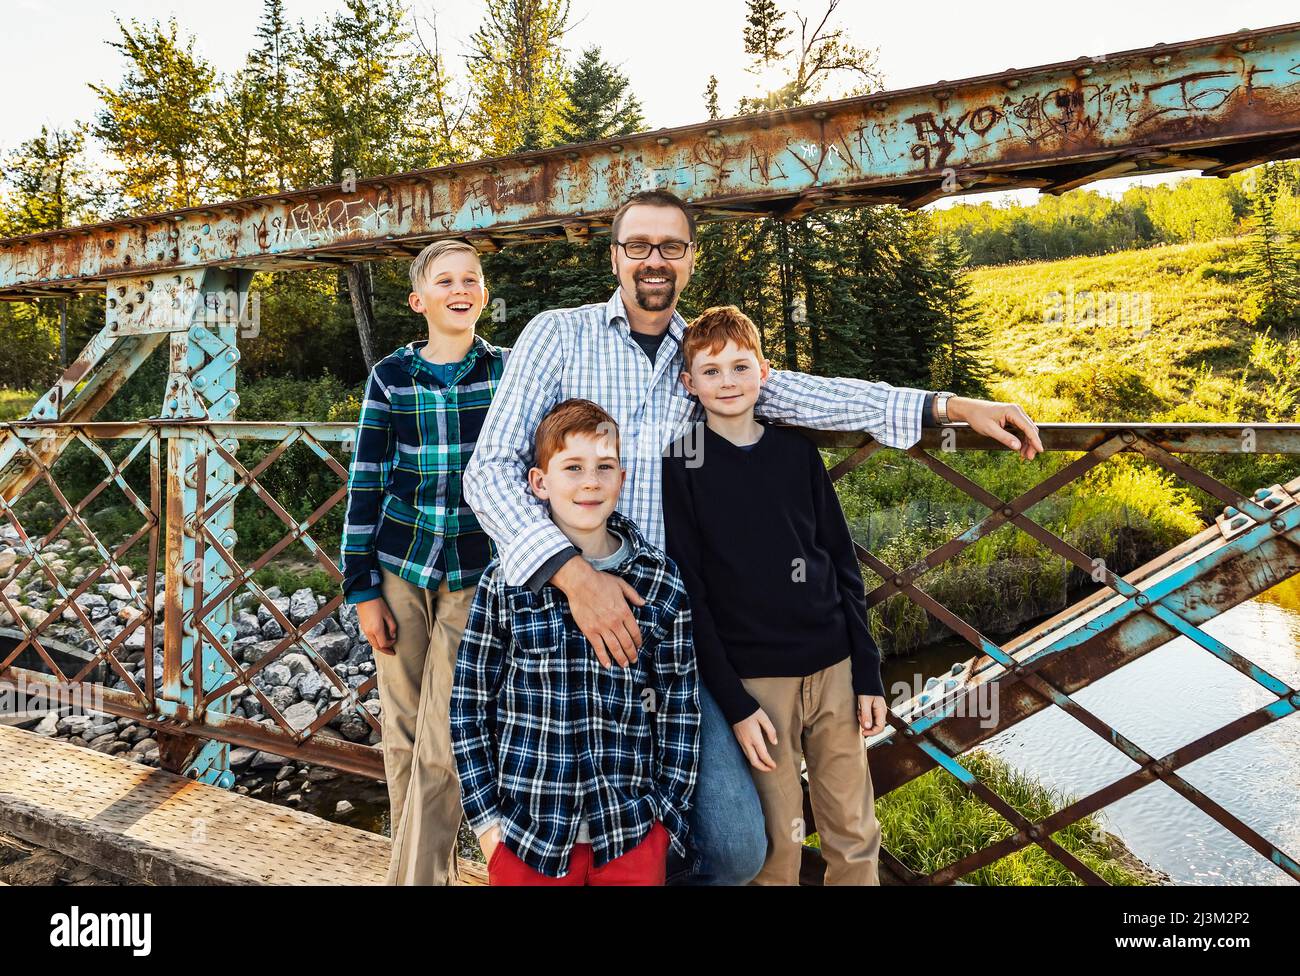 Outdoor portrait of a father with three sons standing on a bridge in a park; Edmonton, Alberta, Canada Stock Photo